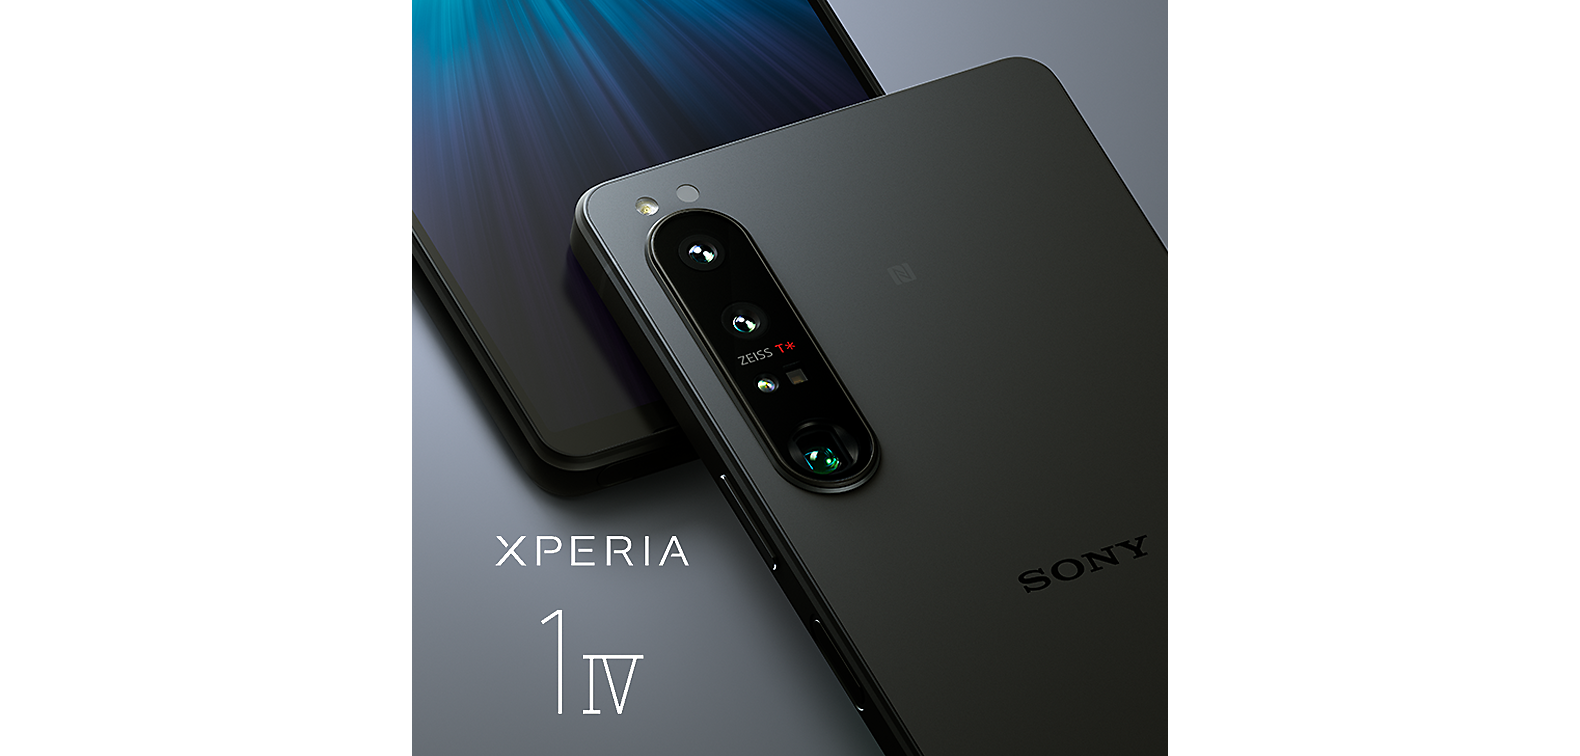 Two Xperia 1 IV smartphones on grey background next to Xperia 1 IV logo.